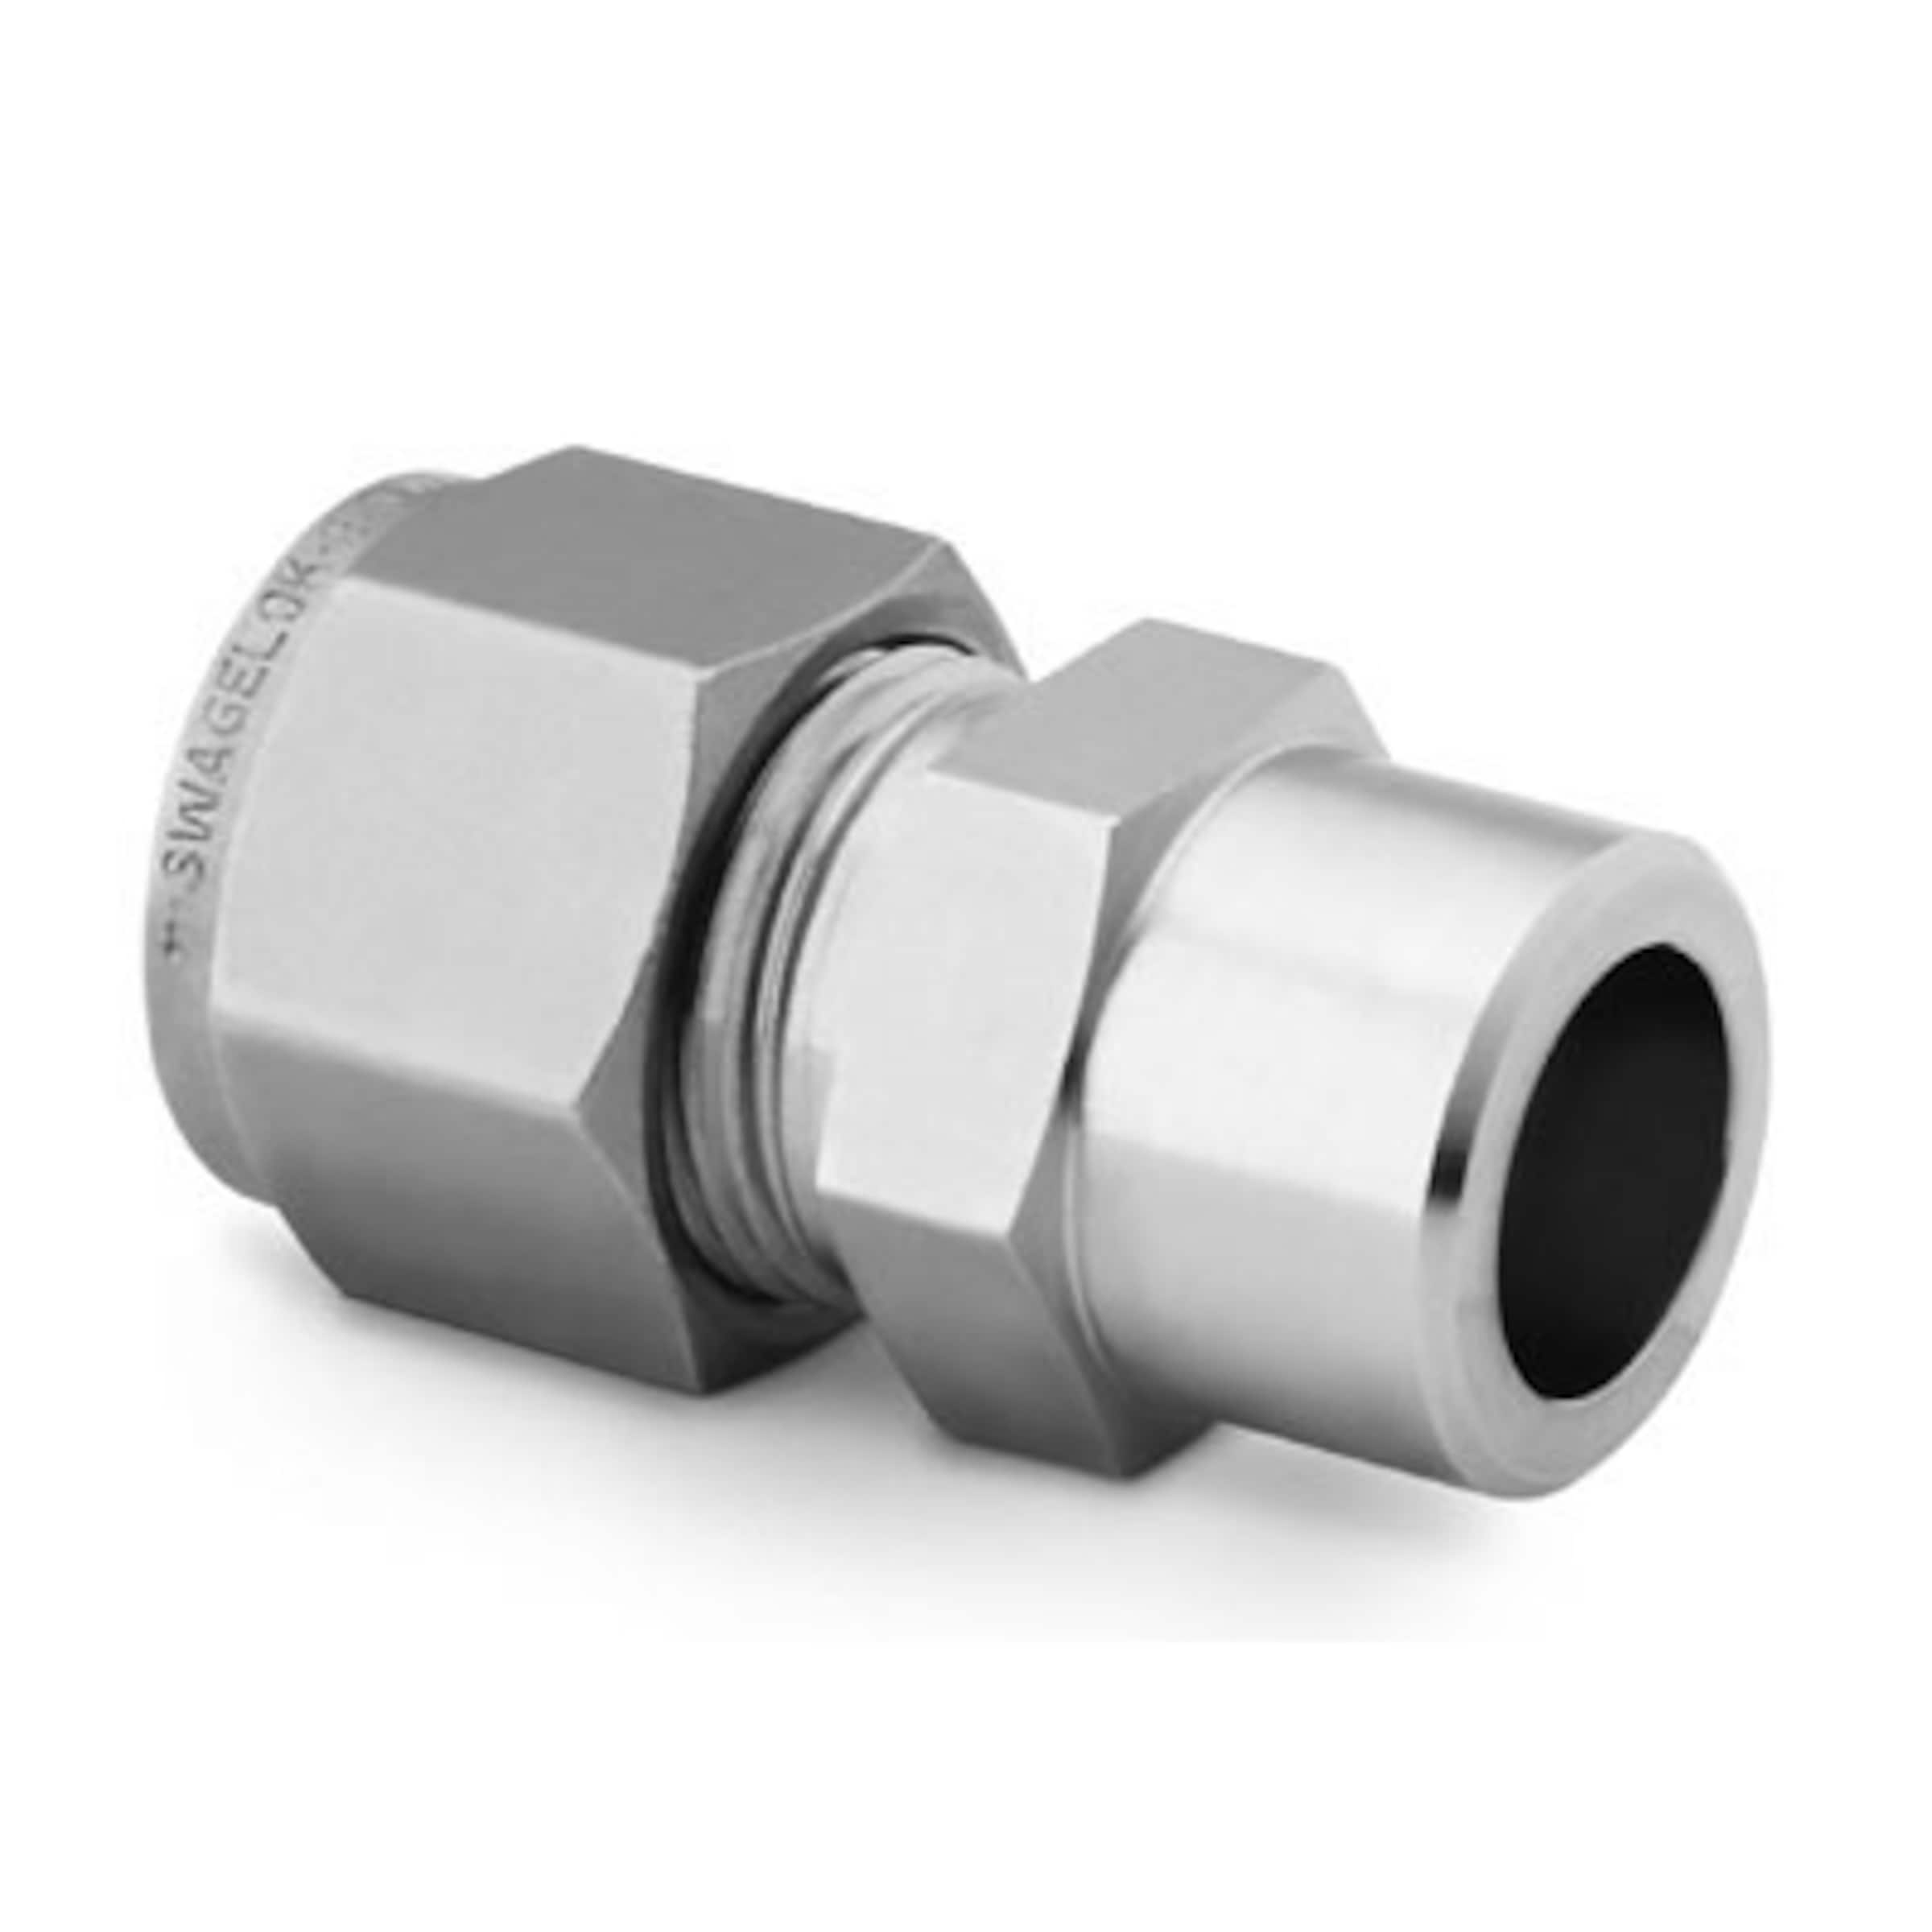 Straights, Socket Weld Fittings, Tube Fittings and Adapters, Fittings, All Products